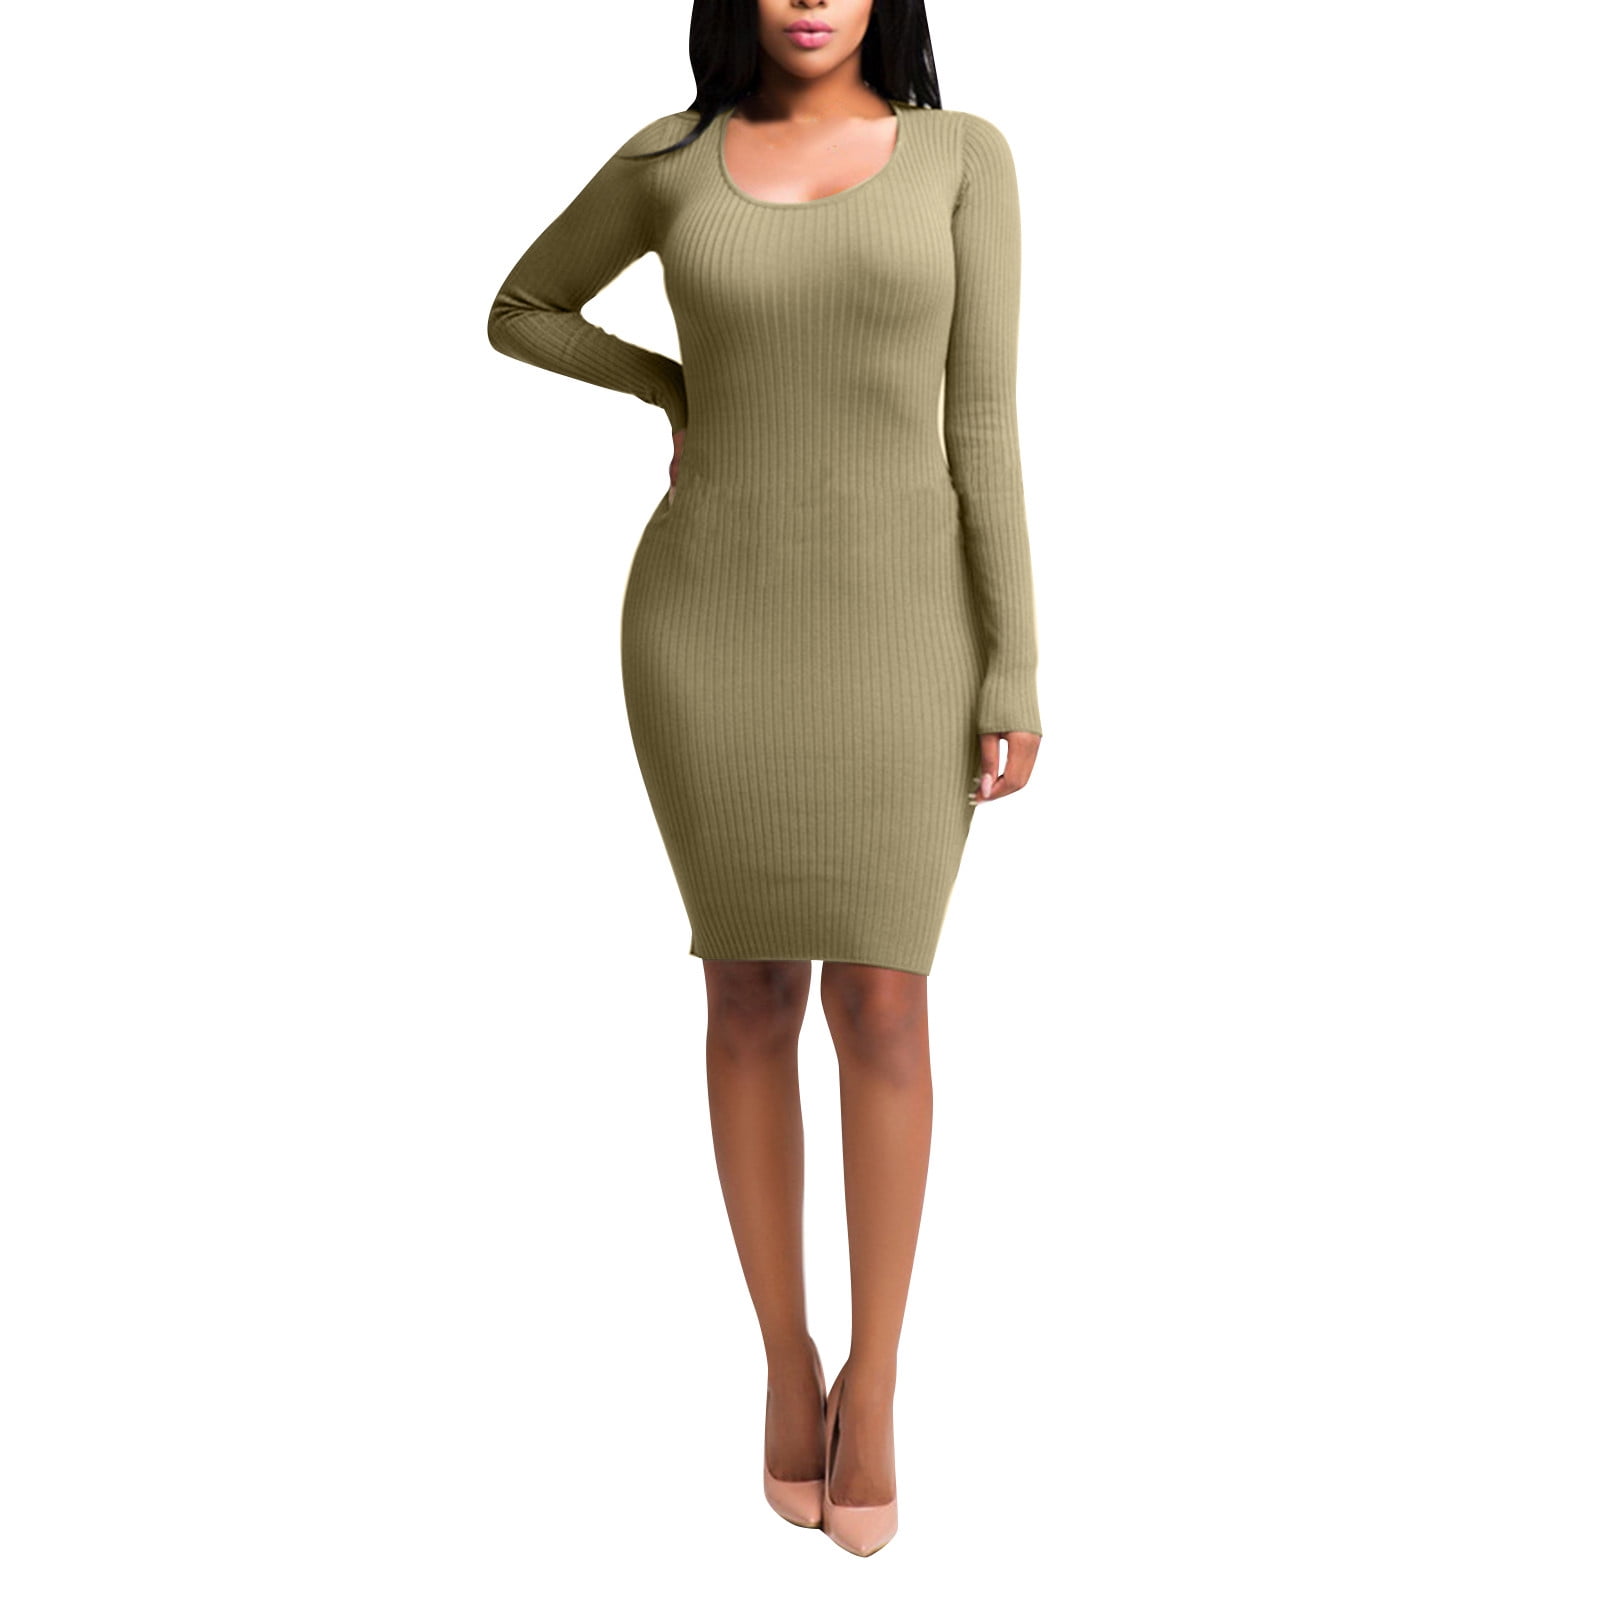 gvdentm Maternity Dresses Womens Crew Neck Sleeveless Bodycon Dress Ribbed  Slim Fit Ruched Stretchy Party Club Short Mini Dress